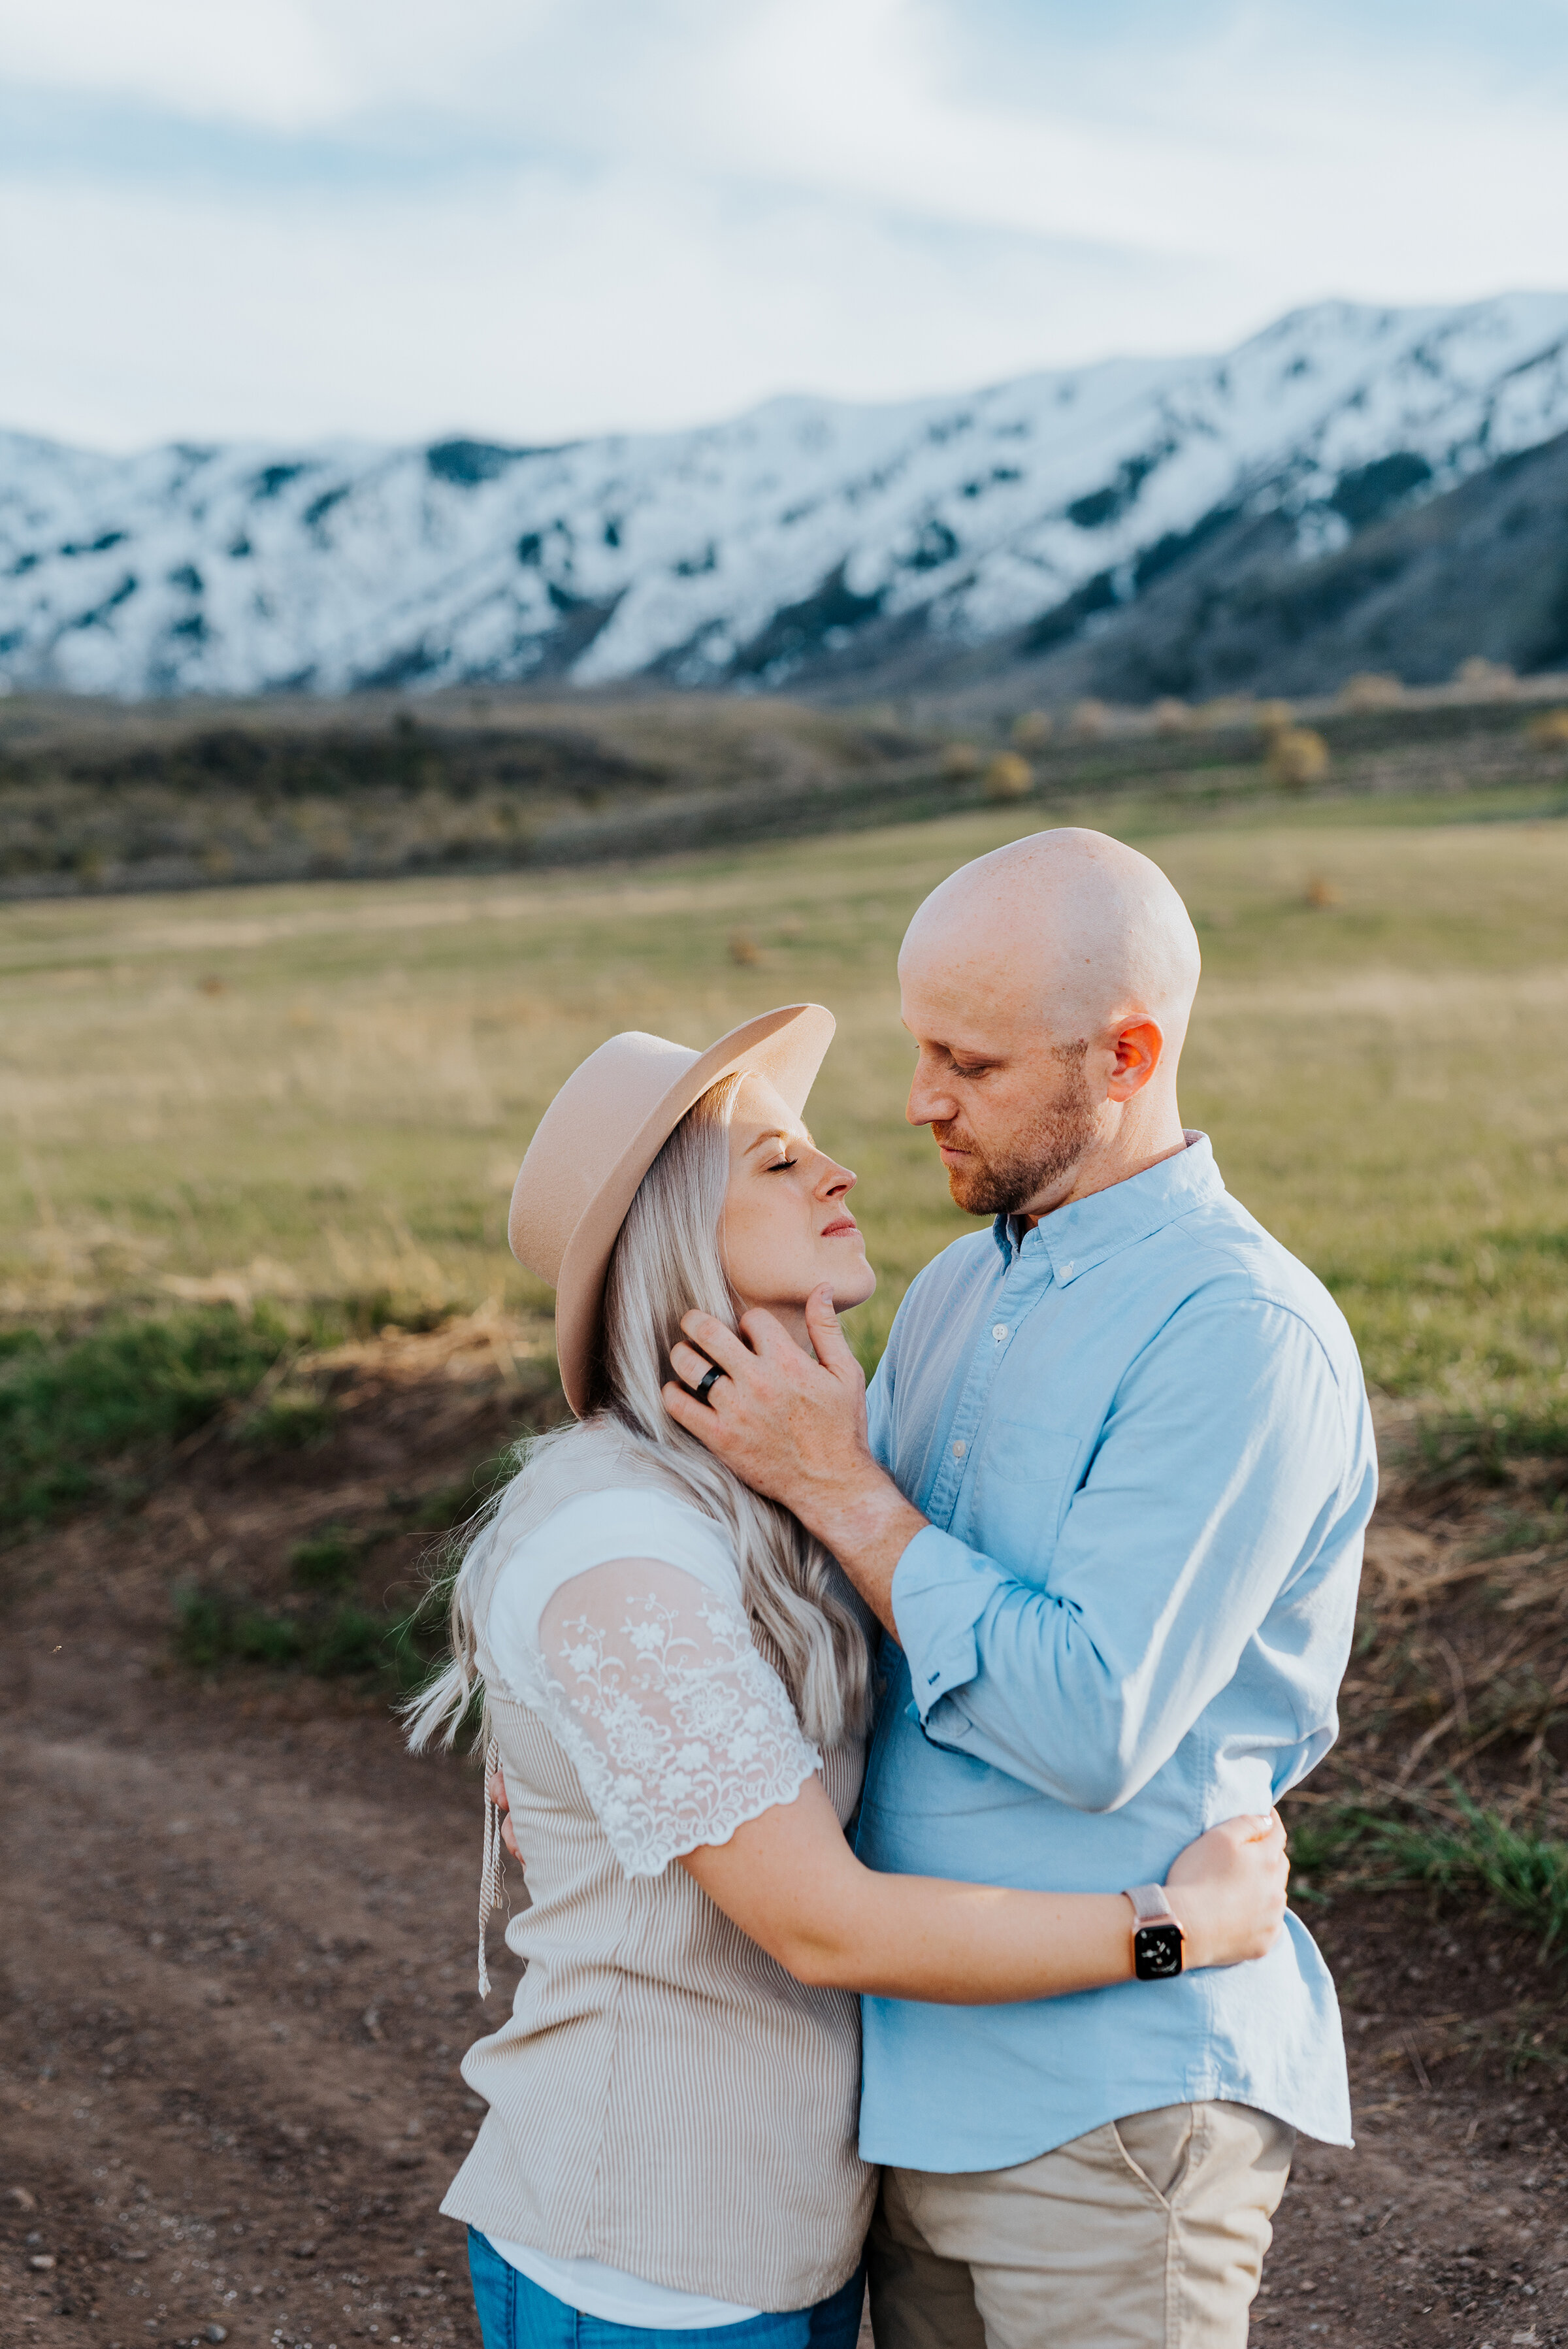  Romantic portraits of a happy couple posing while touching gently in the wellsville mountain range in logan utah. couple photography session romantic family photos mom and dad are in love utah photographer kristi alyse photography happy couple photography #couplesessions #coupleportraits #romanticpics #momanddad #couplesession #couplephotography #coupleposes #familylove #utahcouple #utahparents #photos 